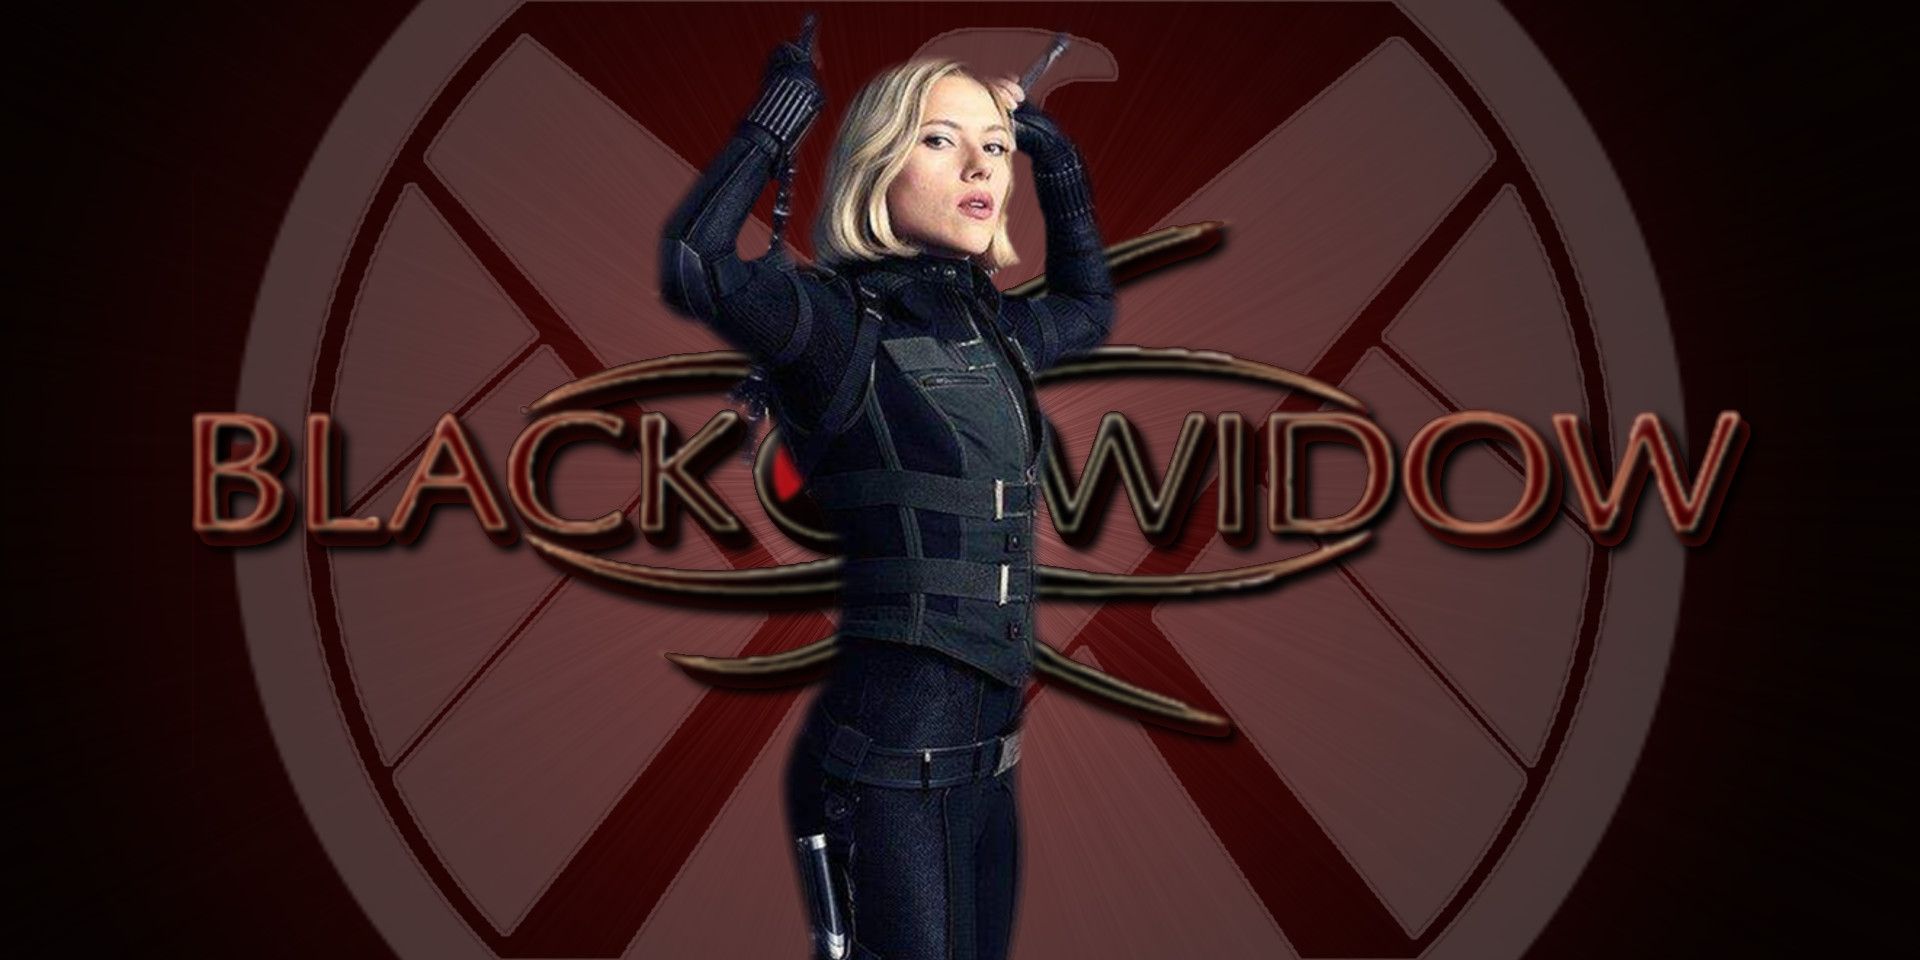 Black Widow Movie Trailer, Cast, Every Update You Need To Know